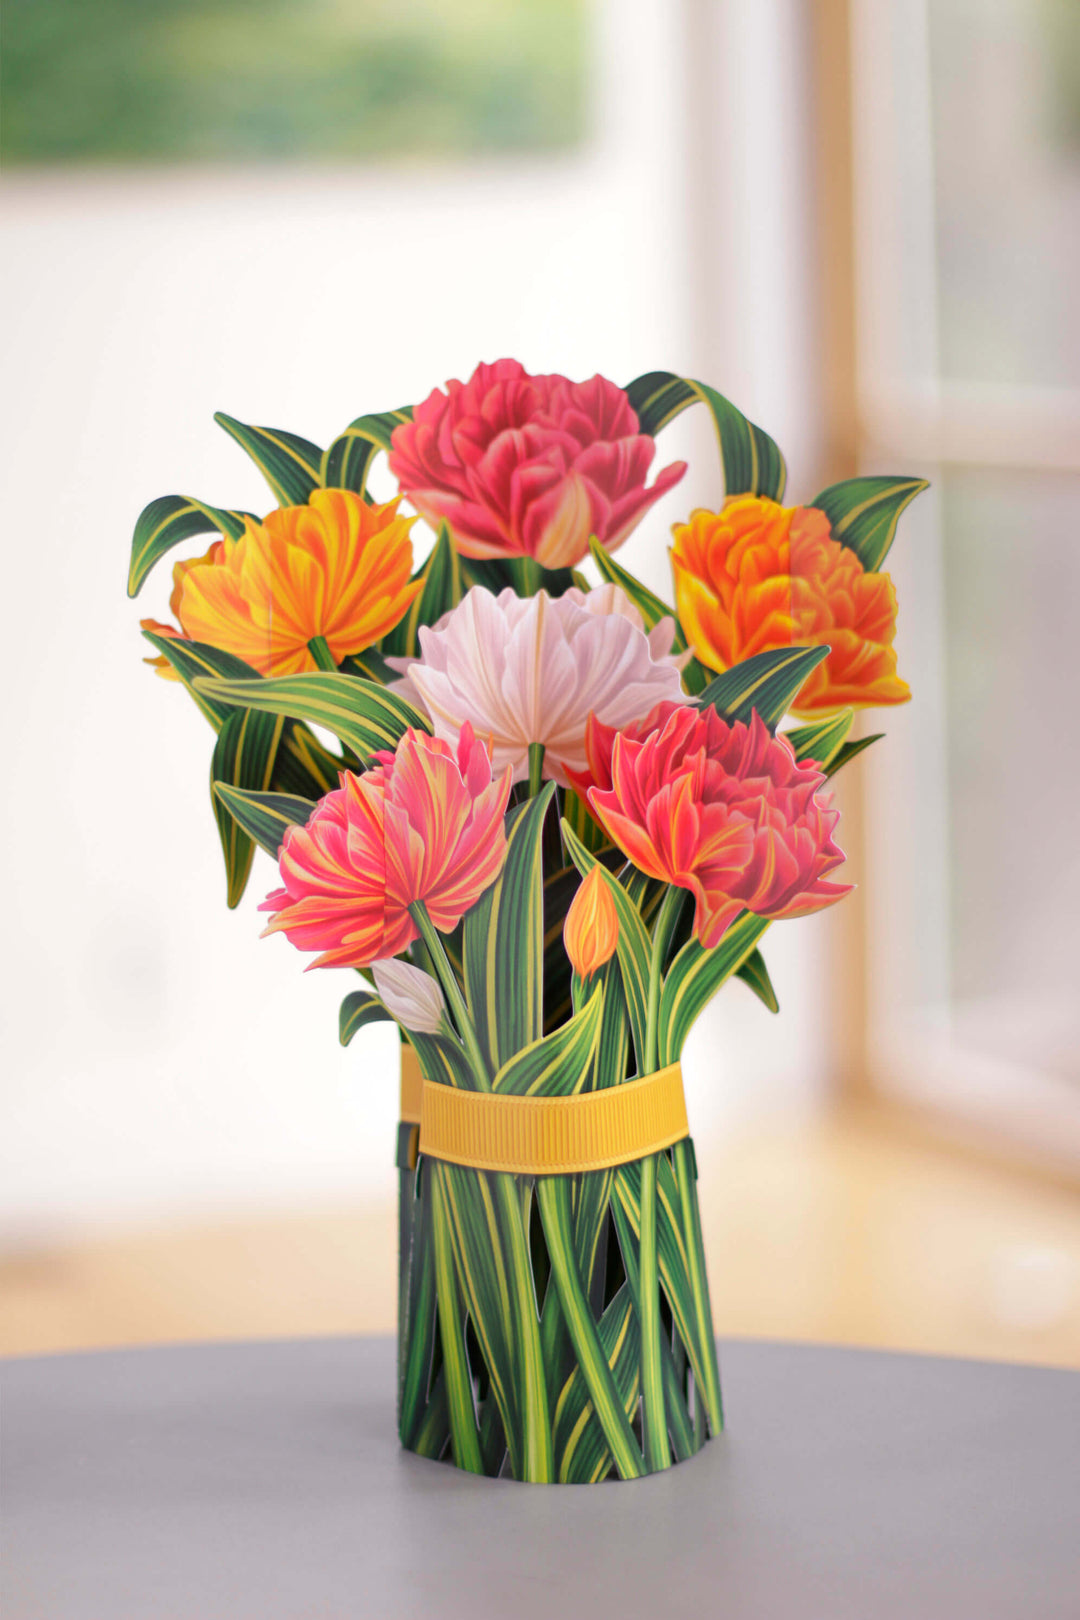 FreshCut Paper 3D pop up "Murillo Tulips" measure 12" tall by 9" wide. Our murillo tulips can stand alone or be used with the accompanying vase that comes with your bouquet. 